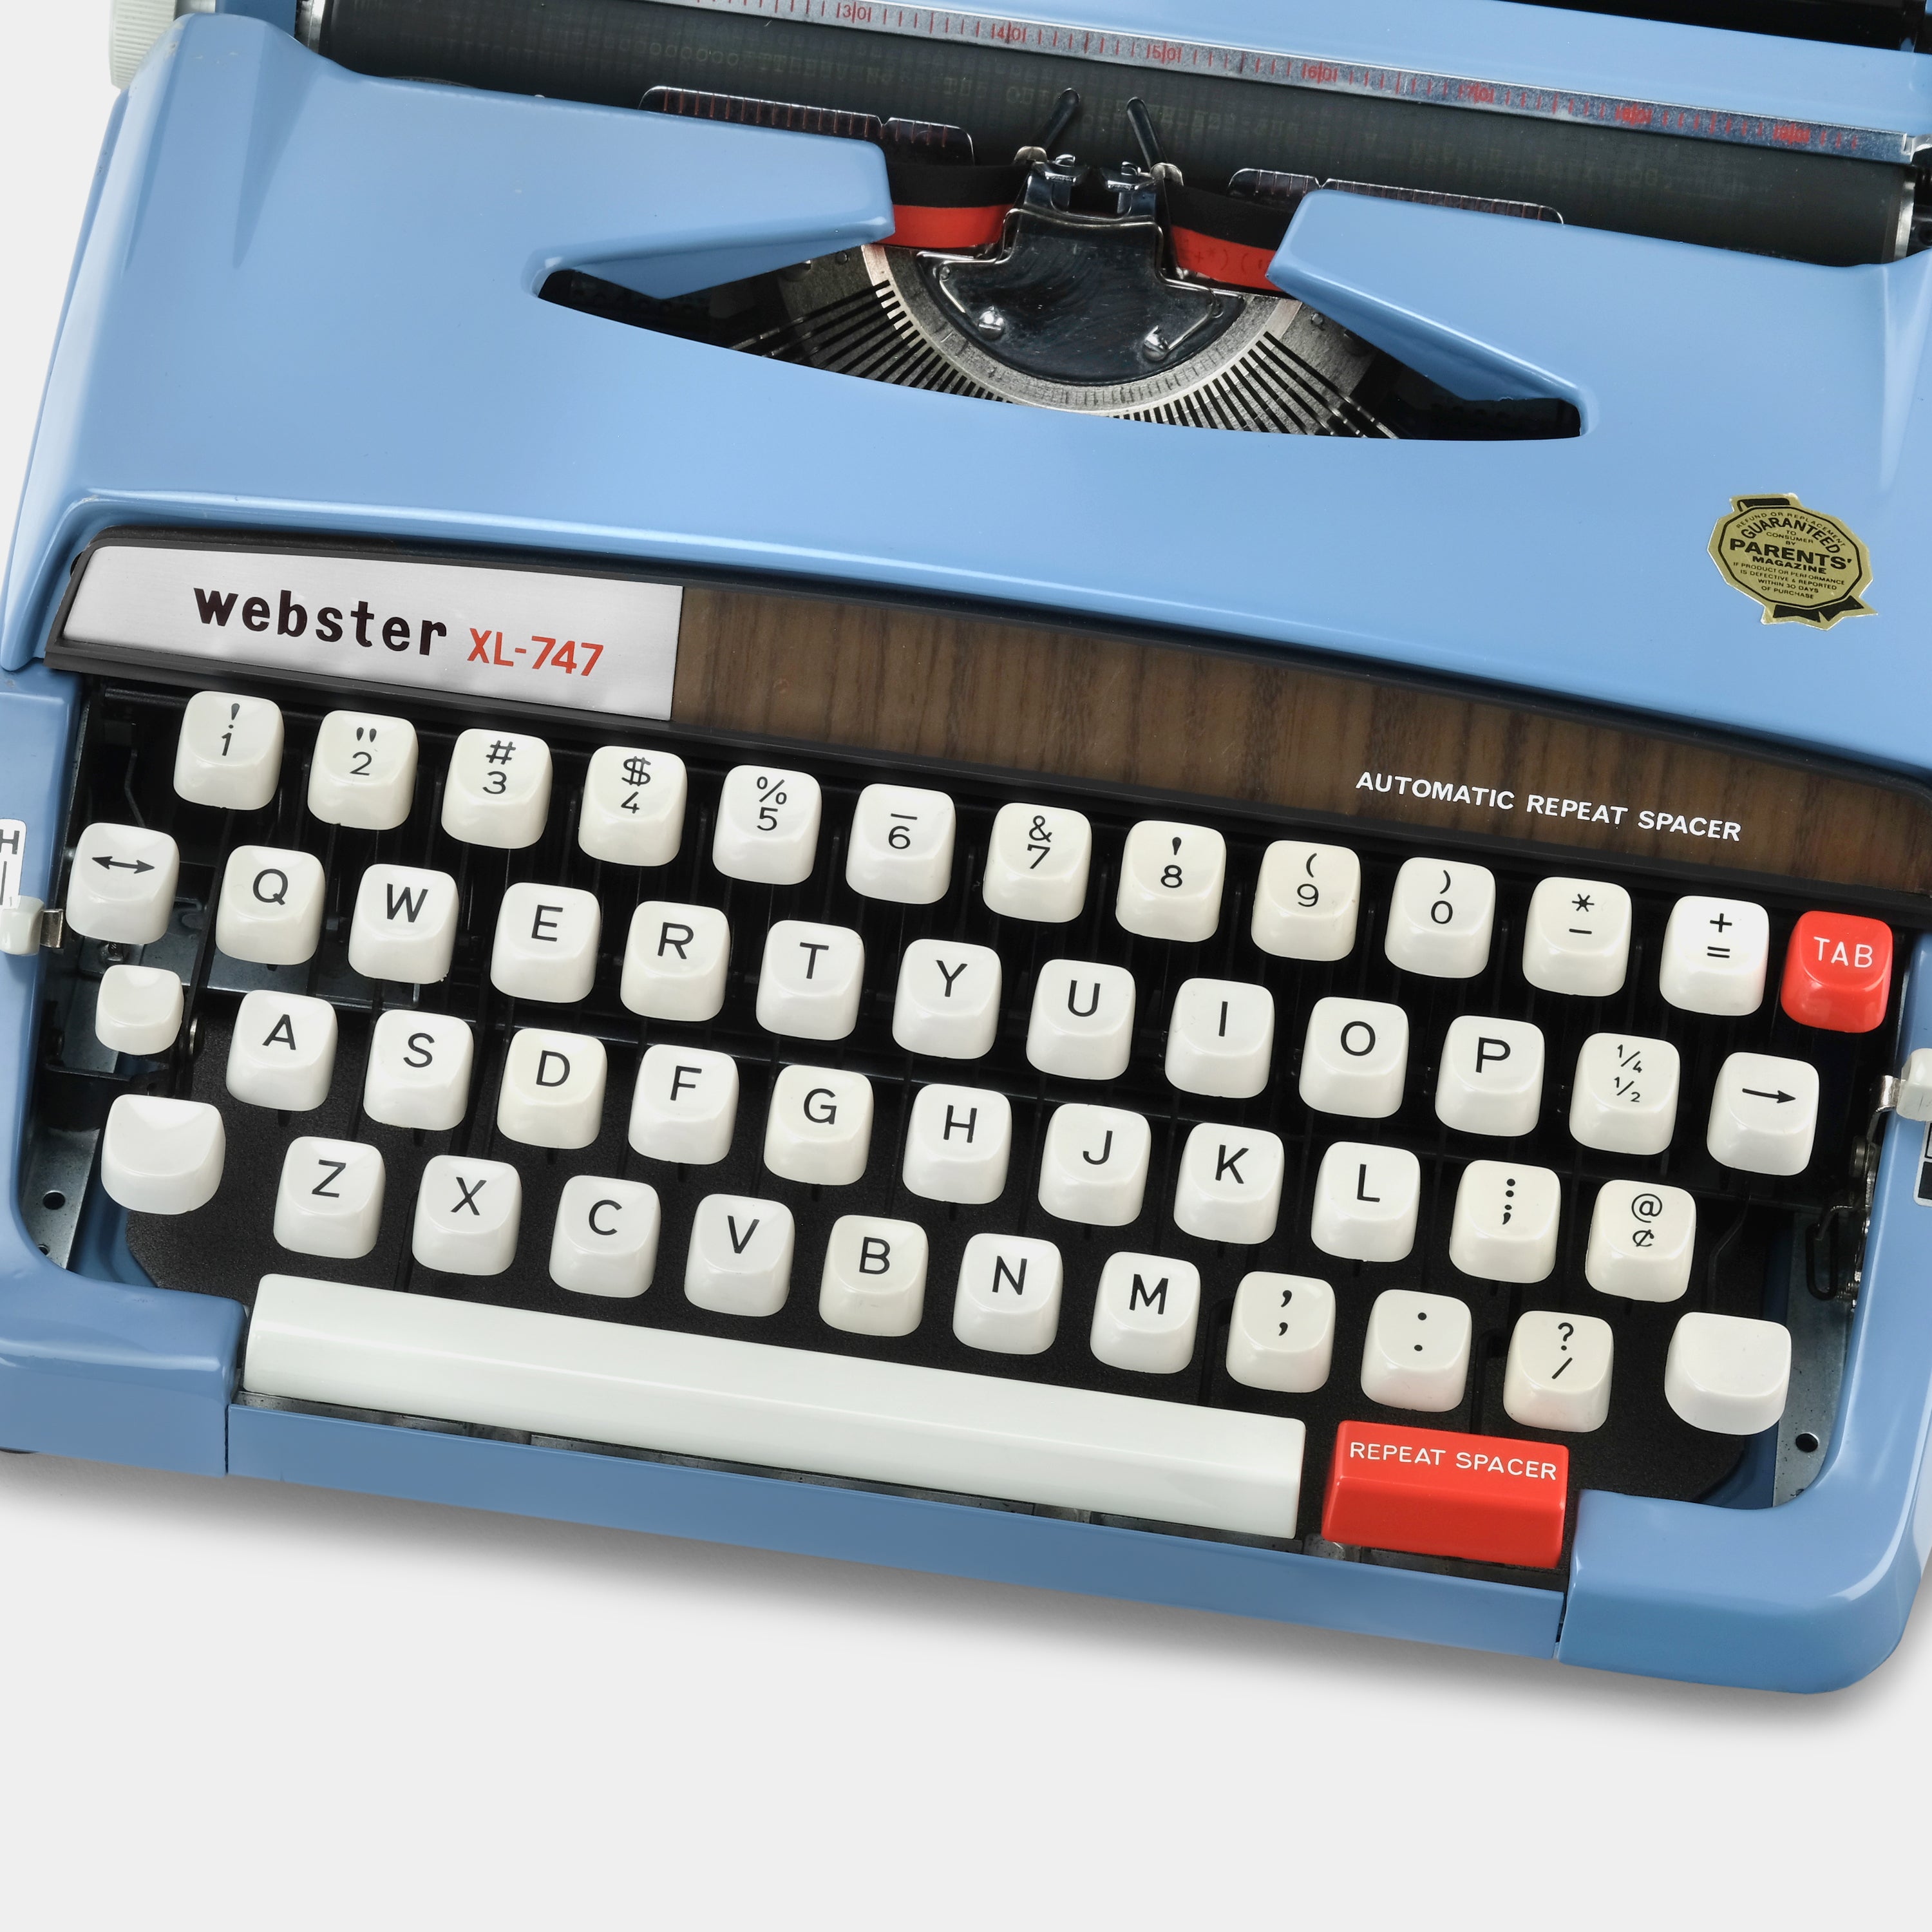 Brother Webster XL-747 Blue Manual Typewriter and Case